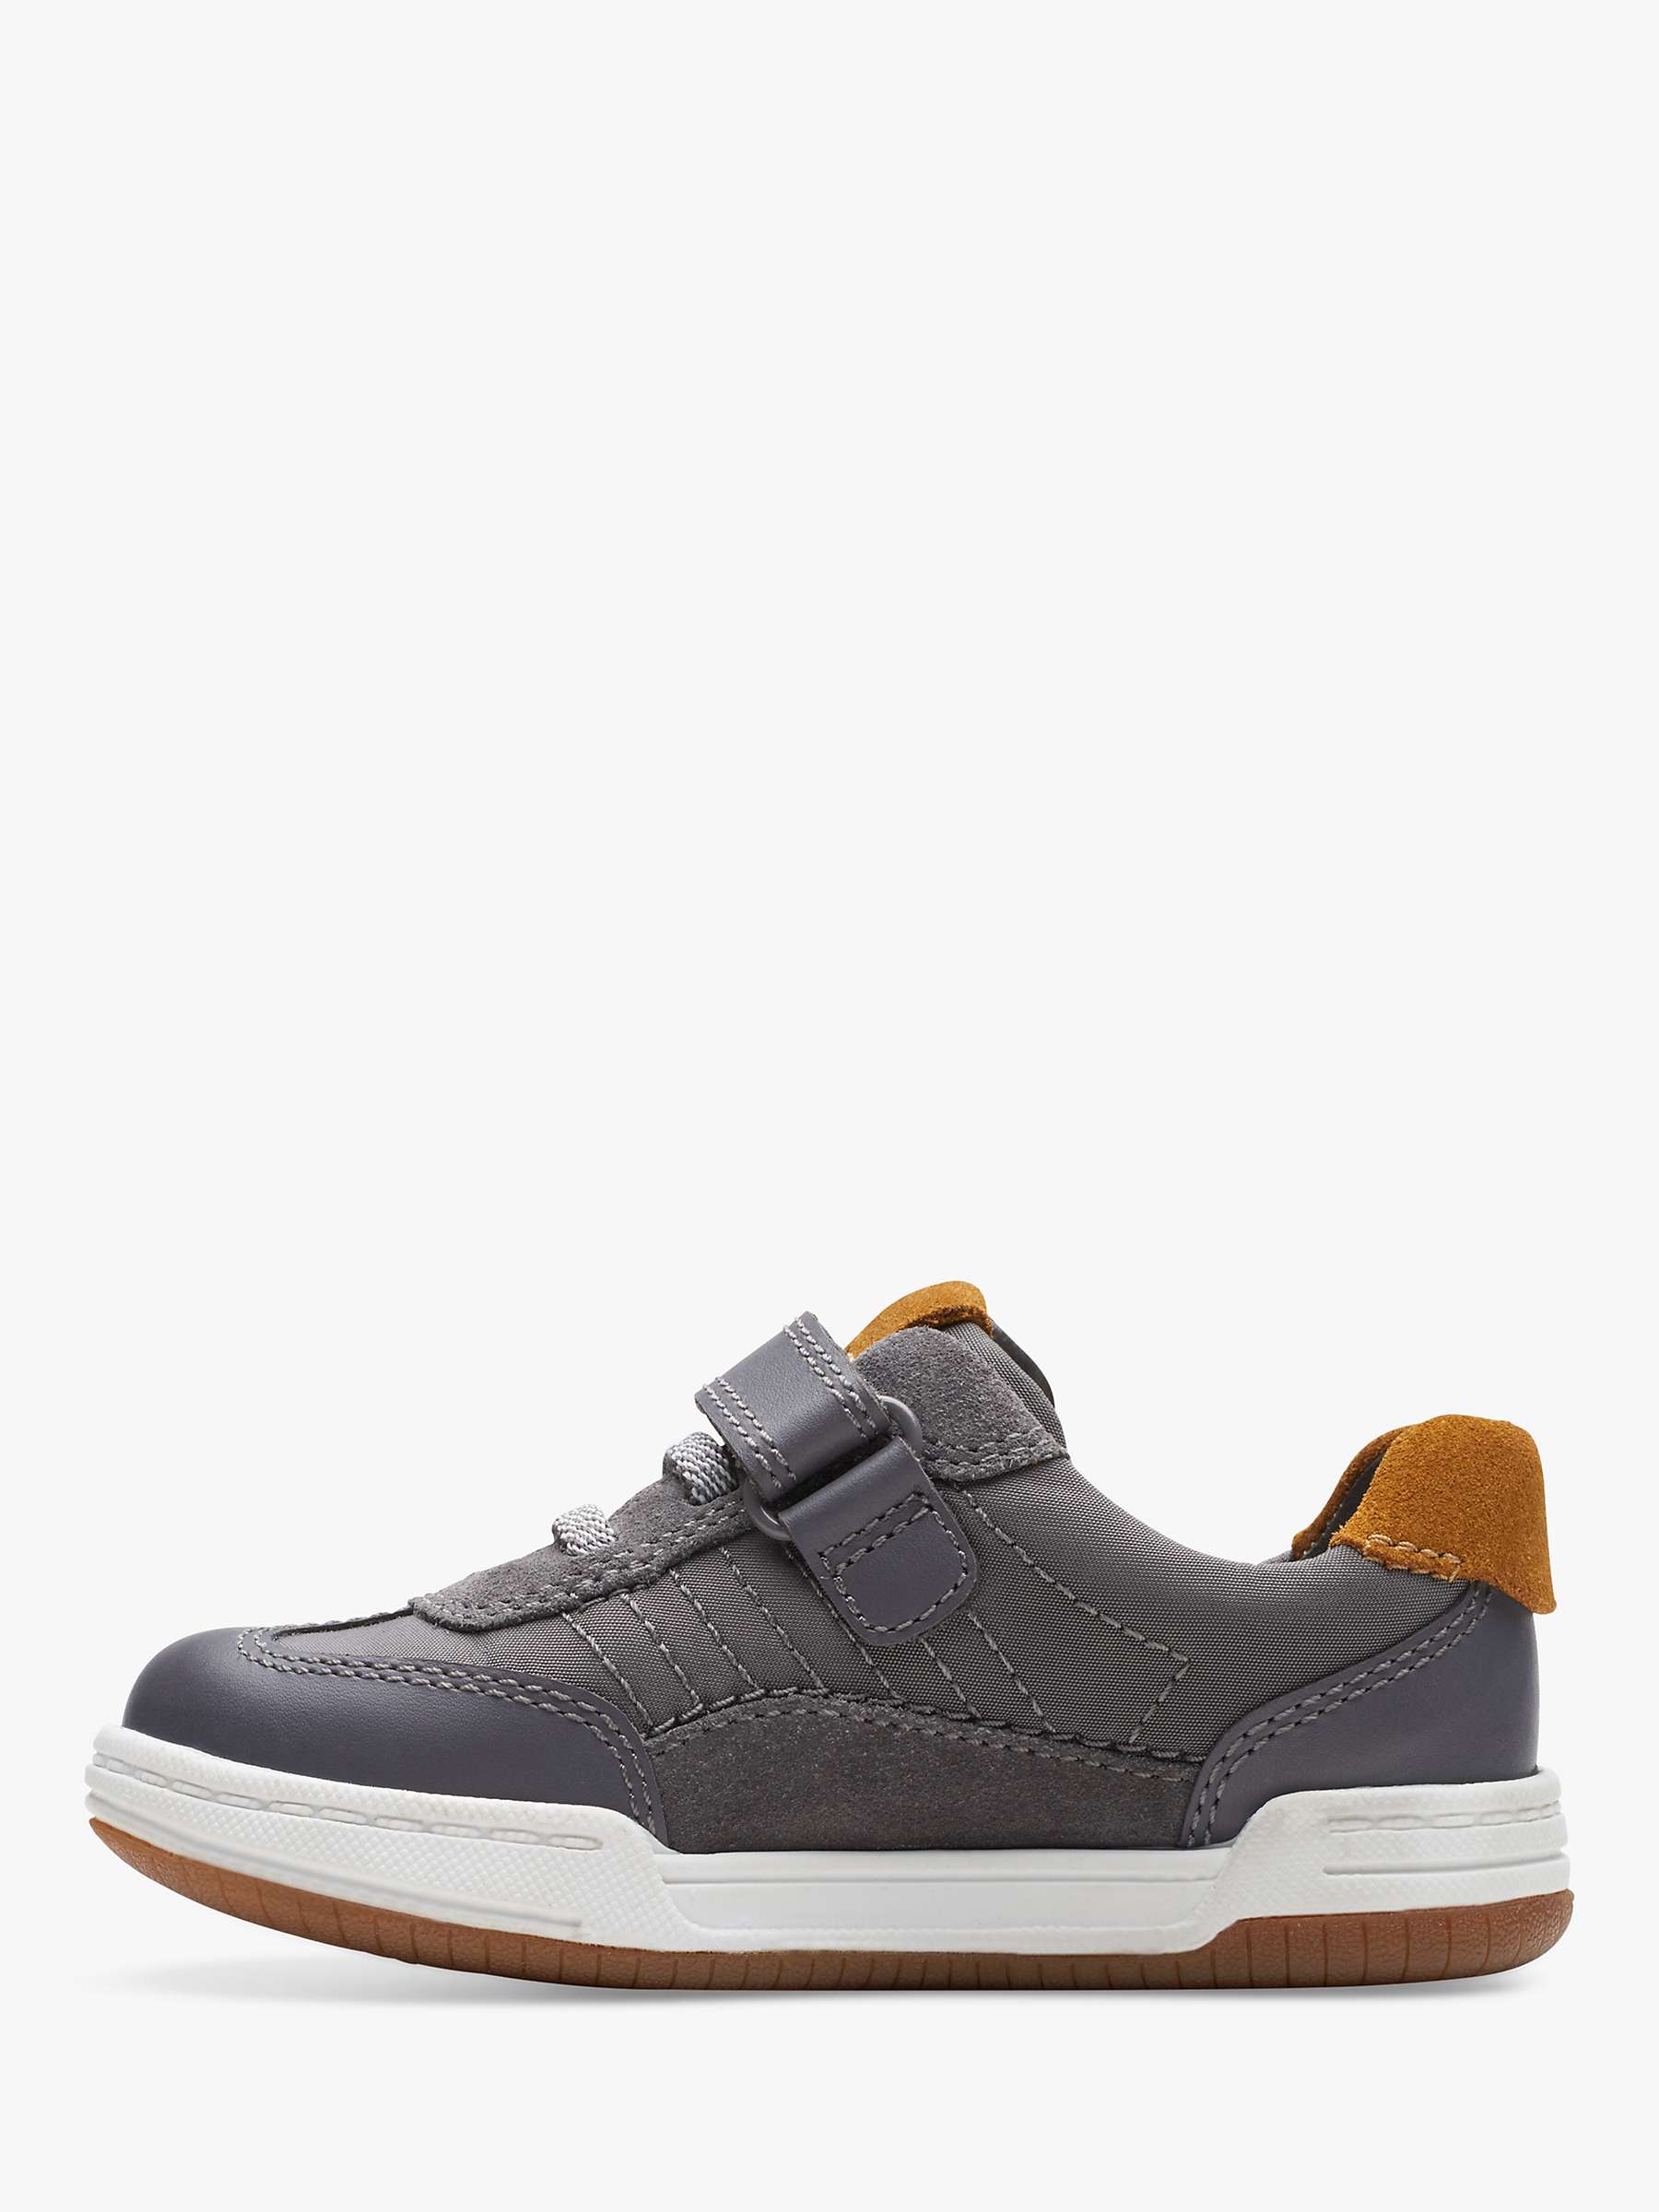 Buy Clarks Kids' Fawn Family Trainers Online at johnlewis.com